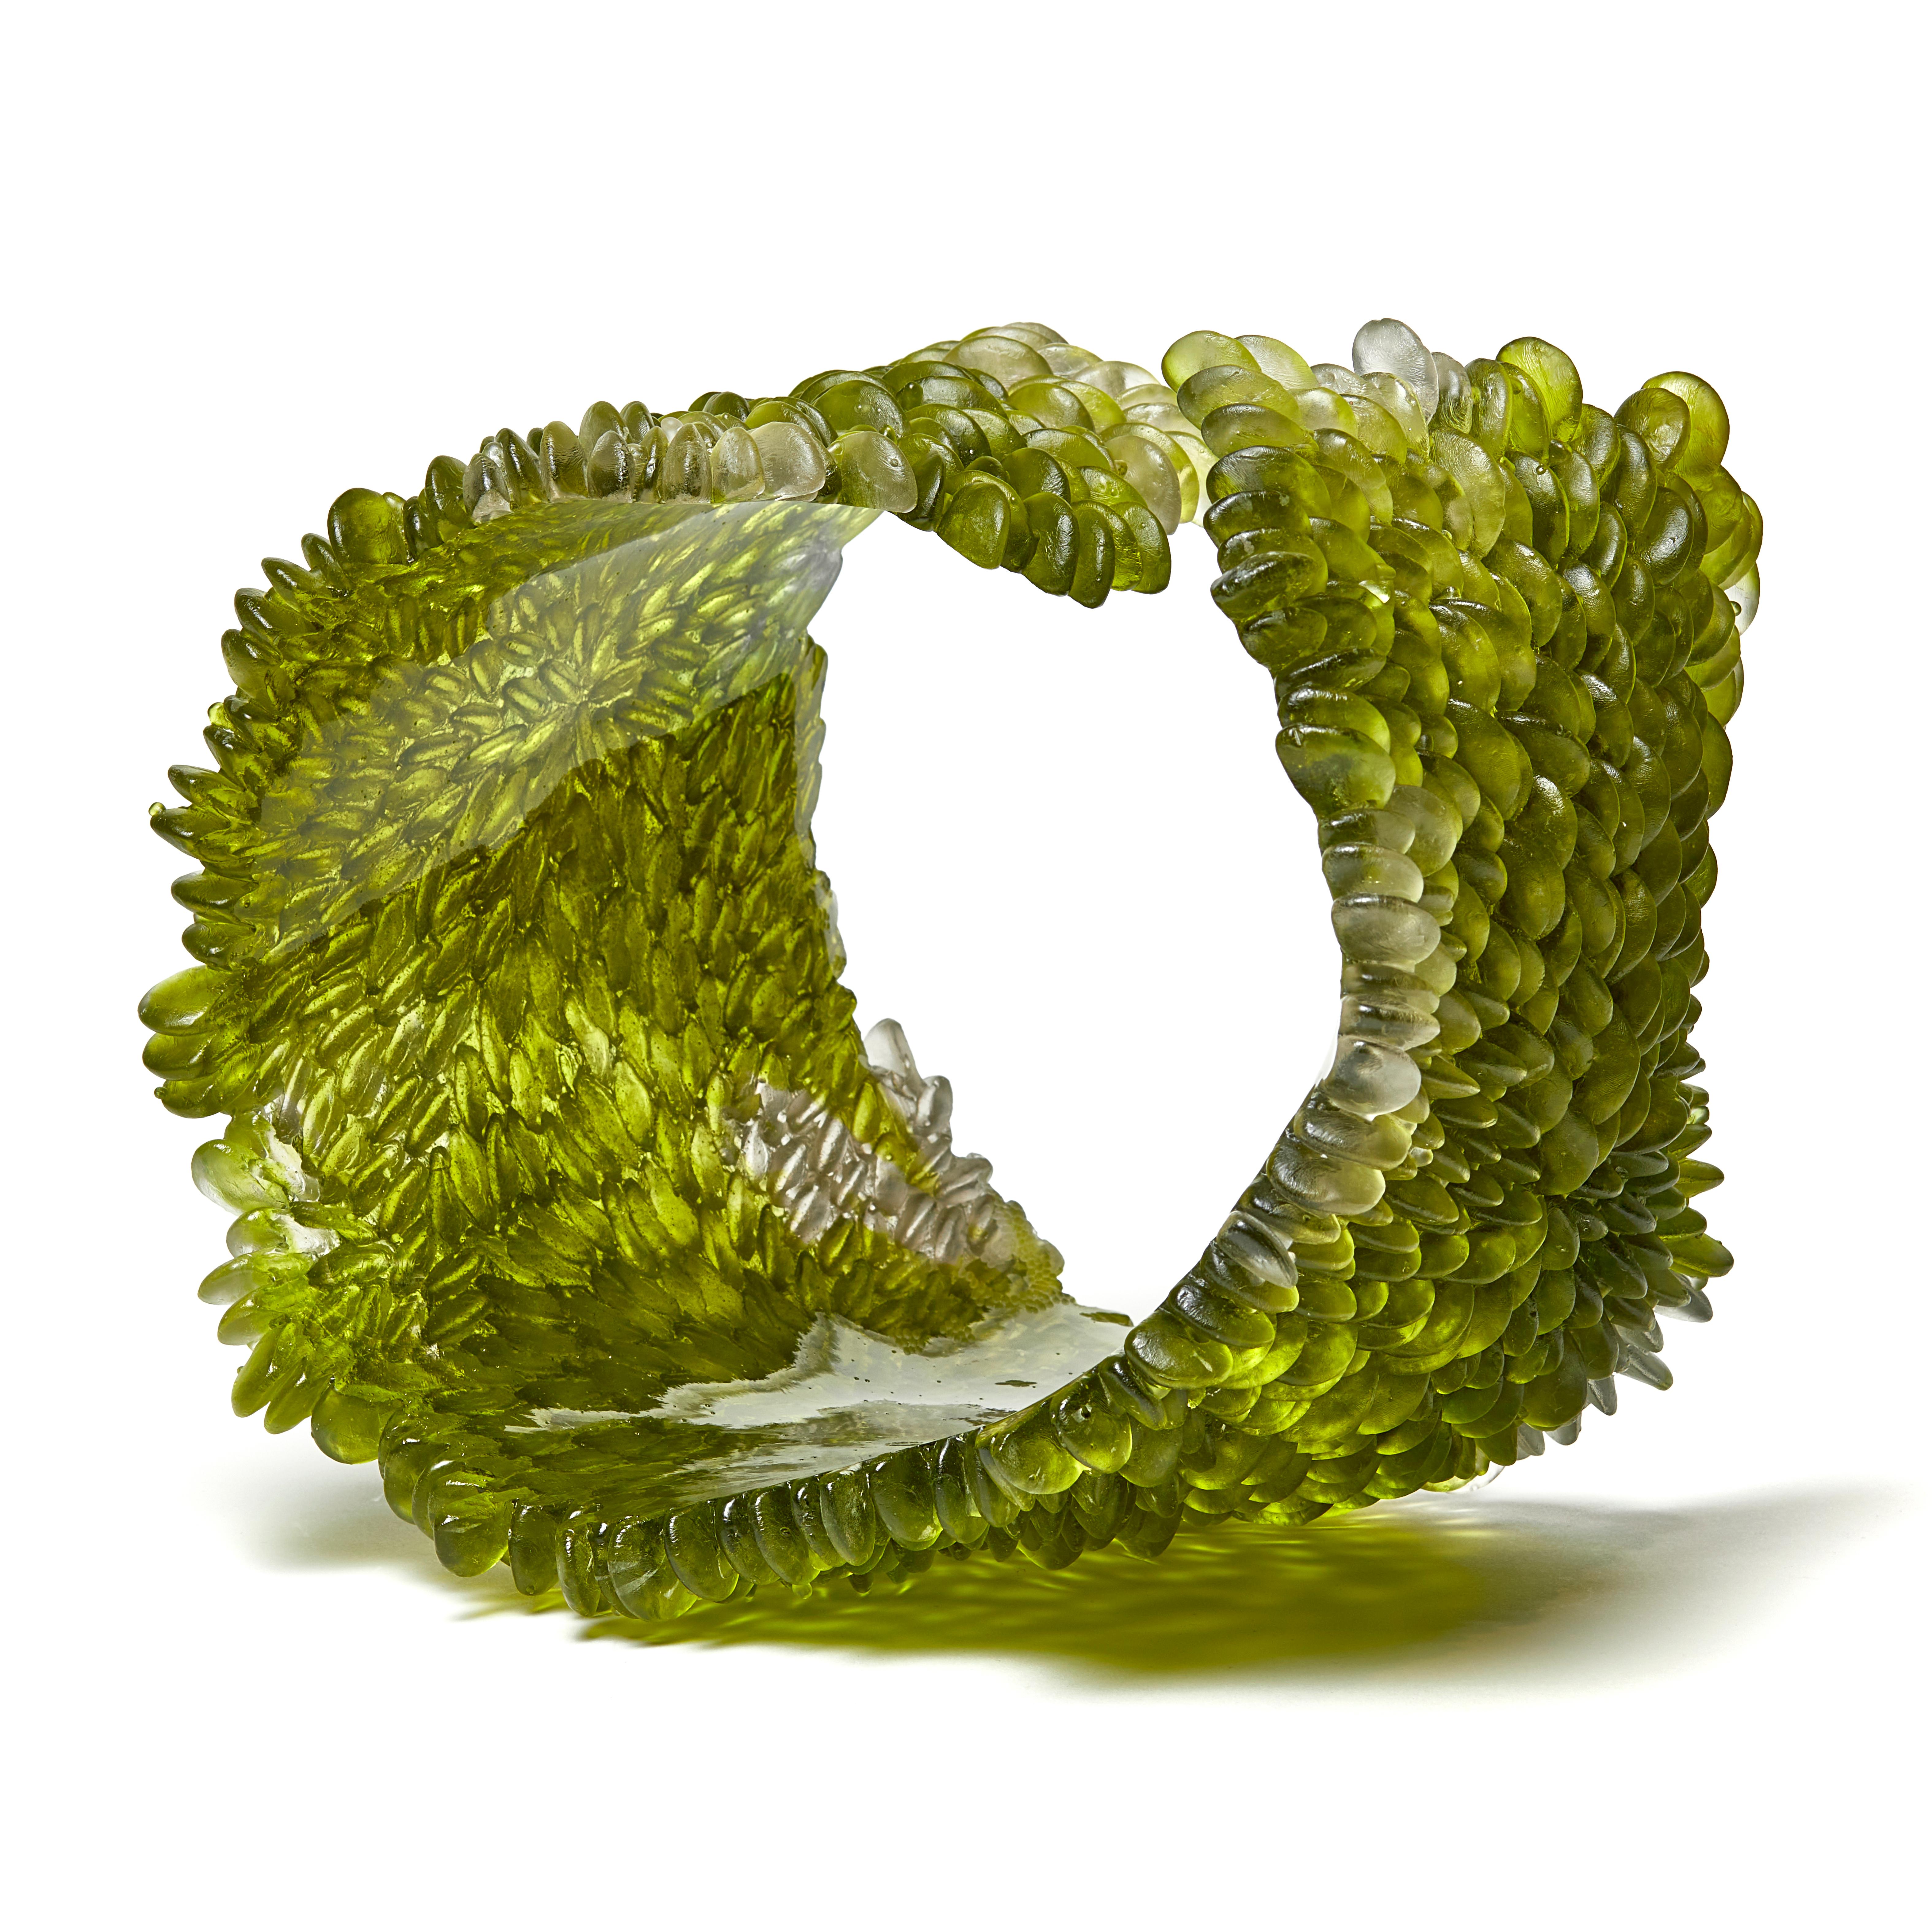 Spring Greens is a unique textured glass sculpture in olive green by the British artist Nina Casson McGarva. 

Casson McGarva firstly casts her glass in a flat mould where she introduces all of the beautifully detailed, scaled surface texture, all